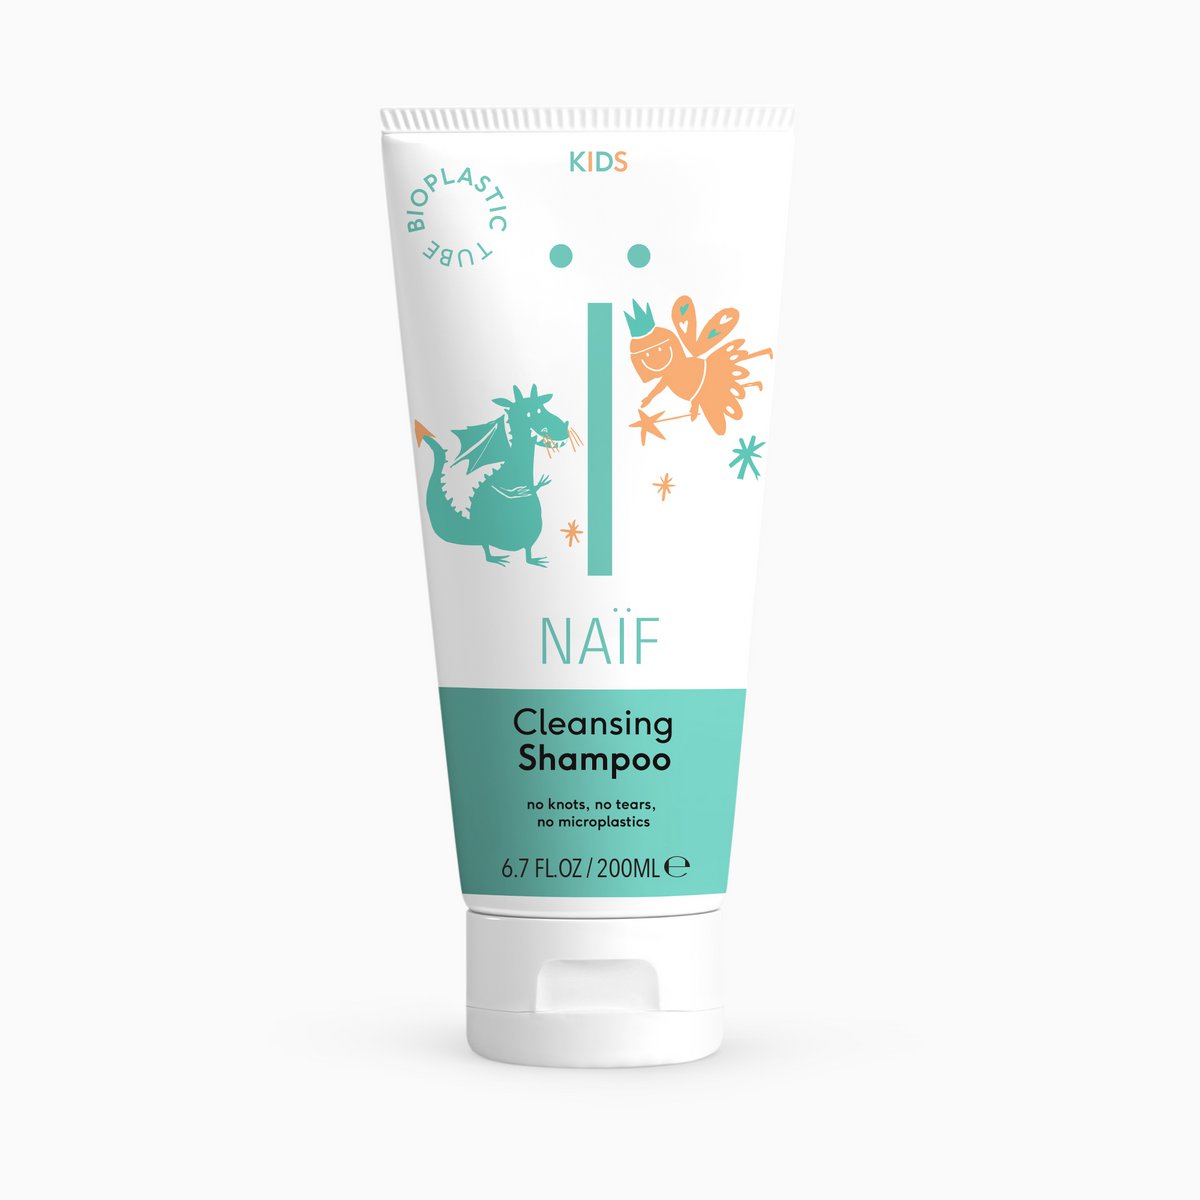 NAIF - Cleansing Shampoo for Kids